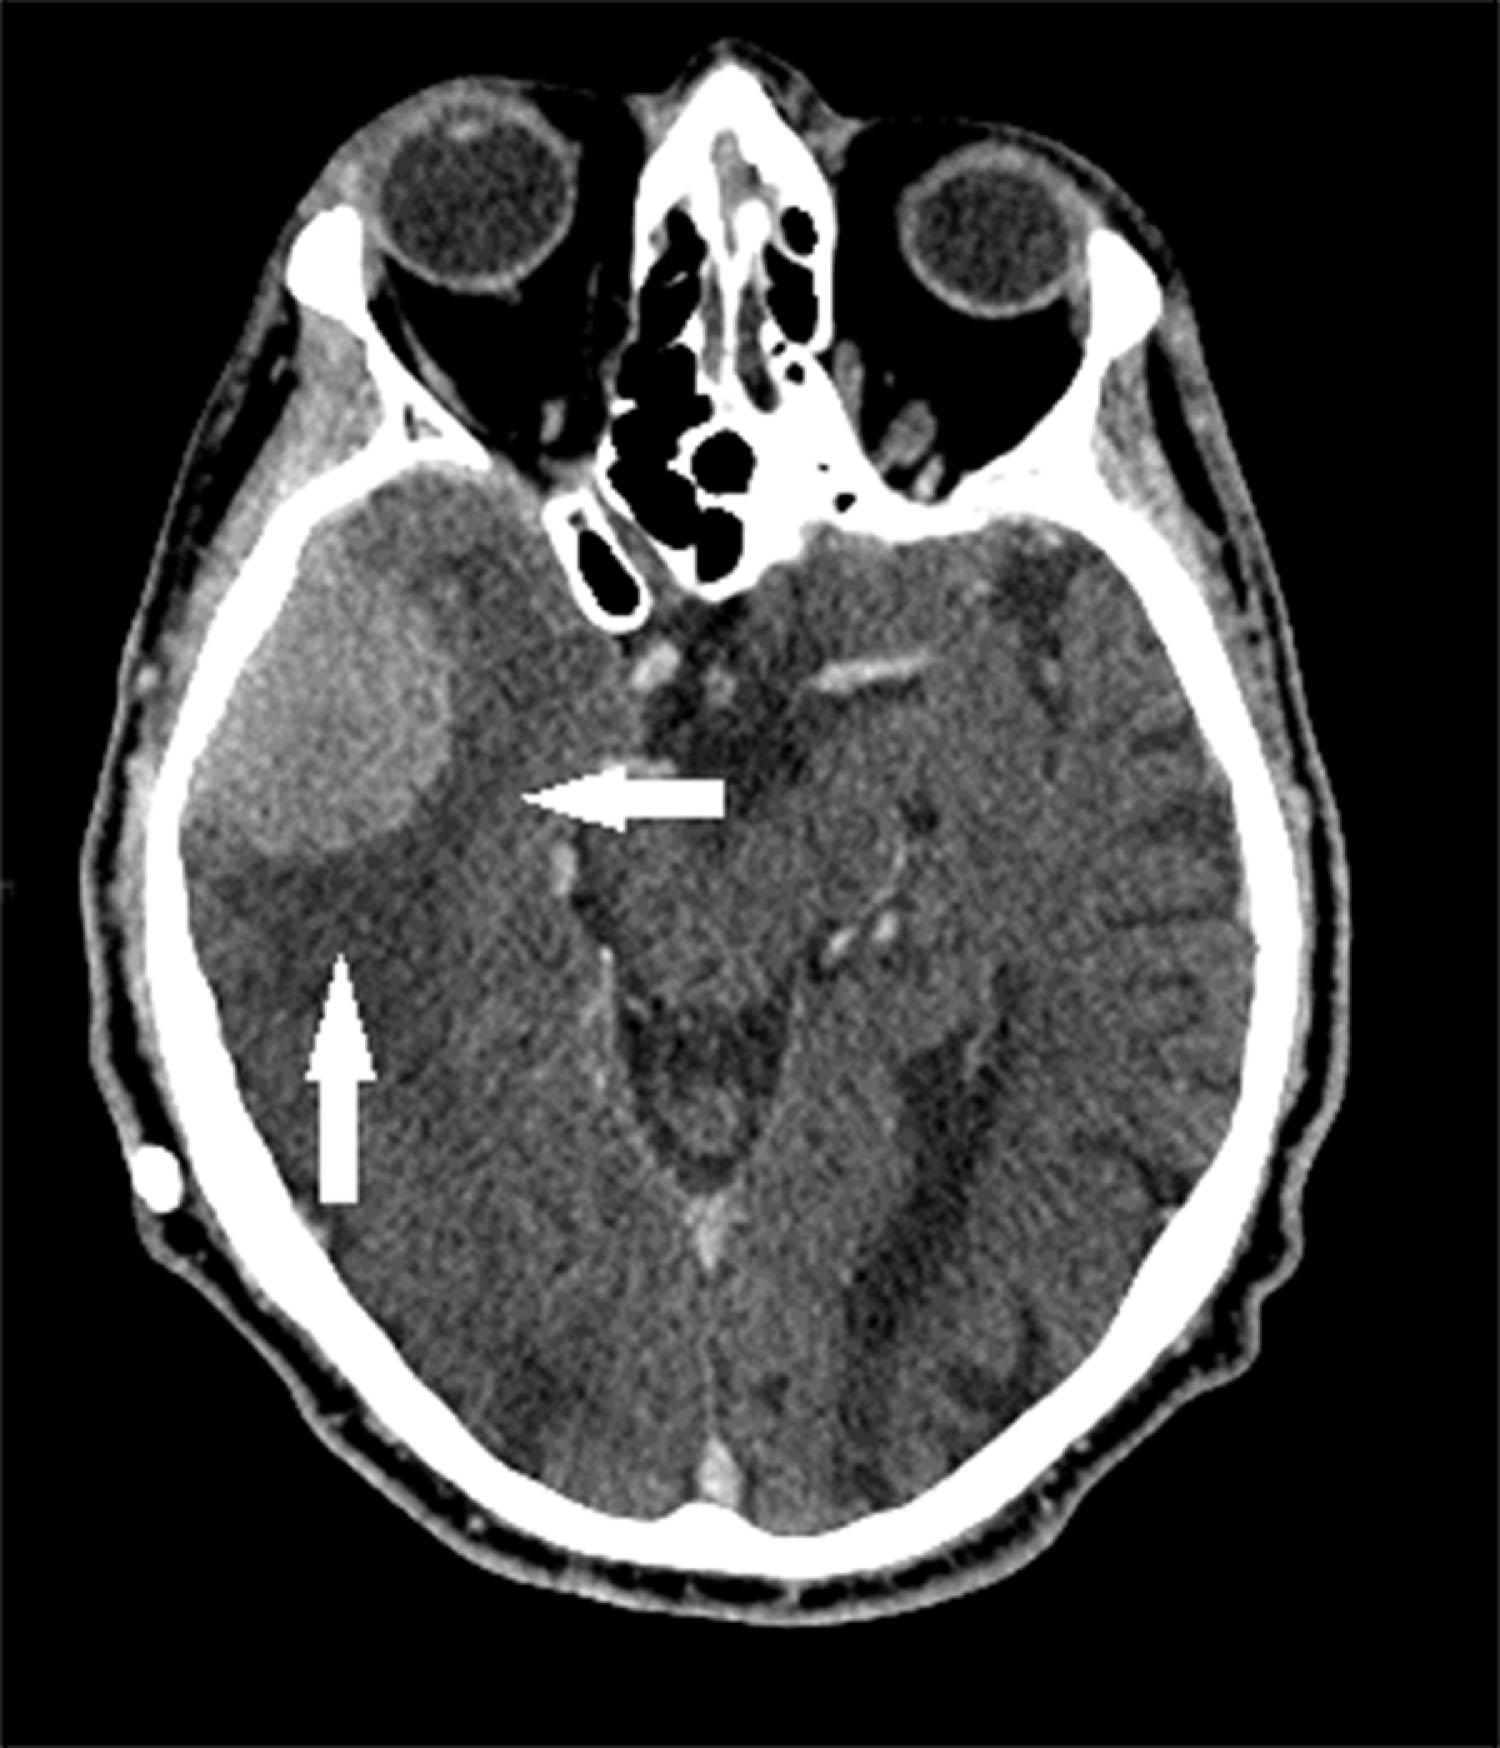 Fig. 20.10, A contrast-enhanced axial CT shows a large, rounded radiodense right temporal lesion, with a dural margin and some local edema (arrows) . The lesion is typical of a chronic, slowly growing meningioma.